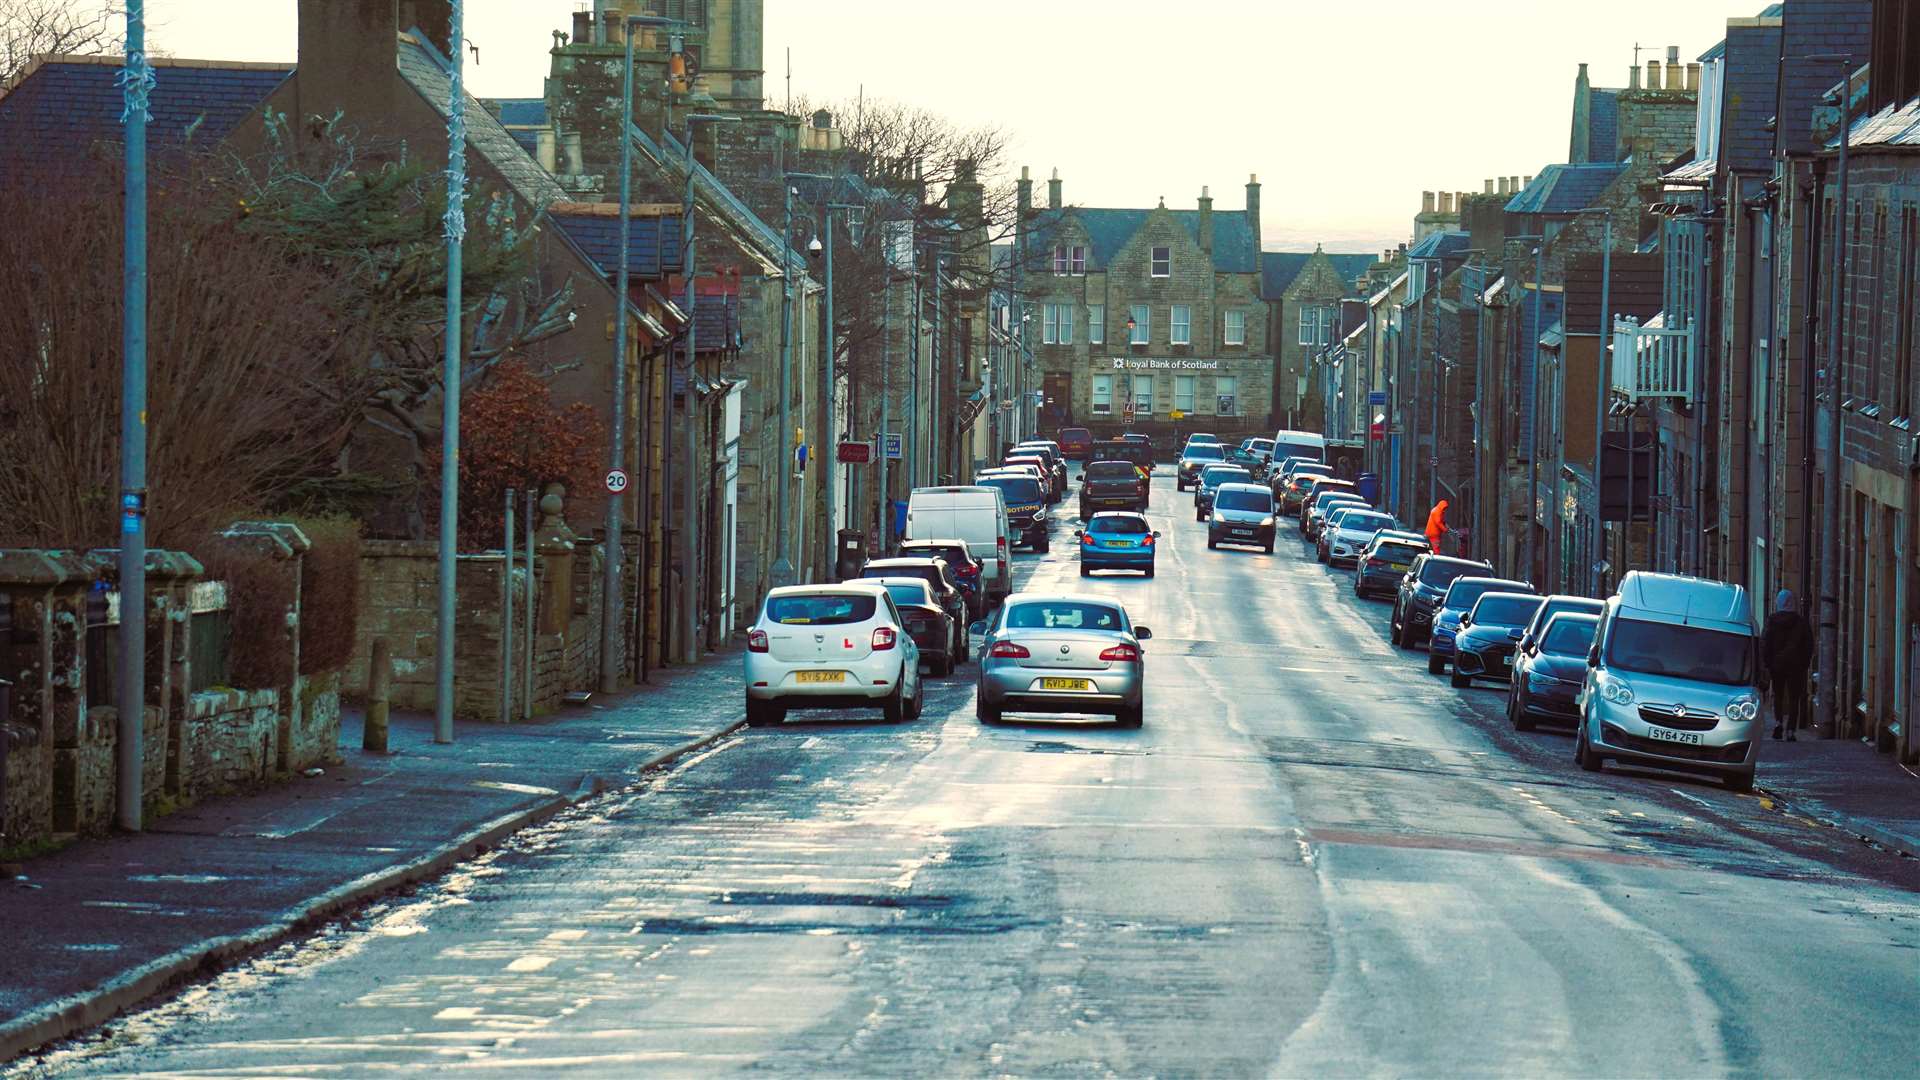 Princes Street in Thurso. The town has a good record for driving test pass rates according to DVLA stats. Picture: DGS